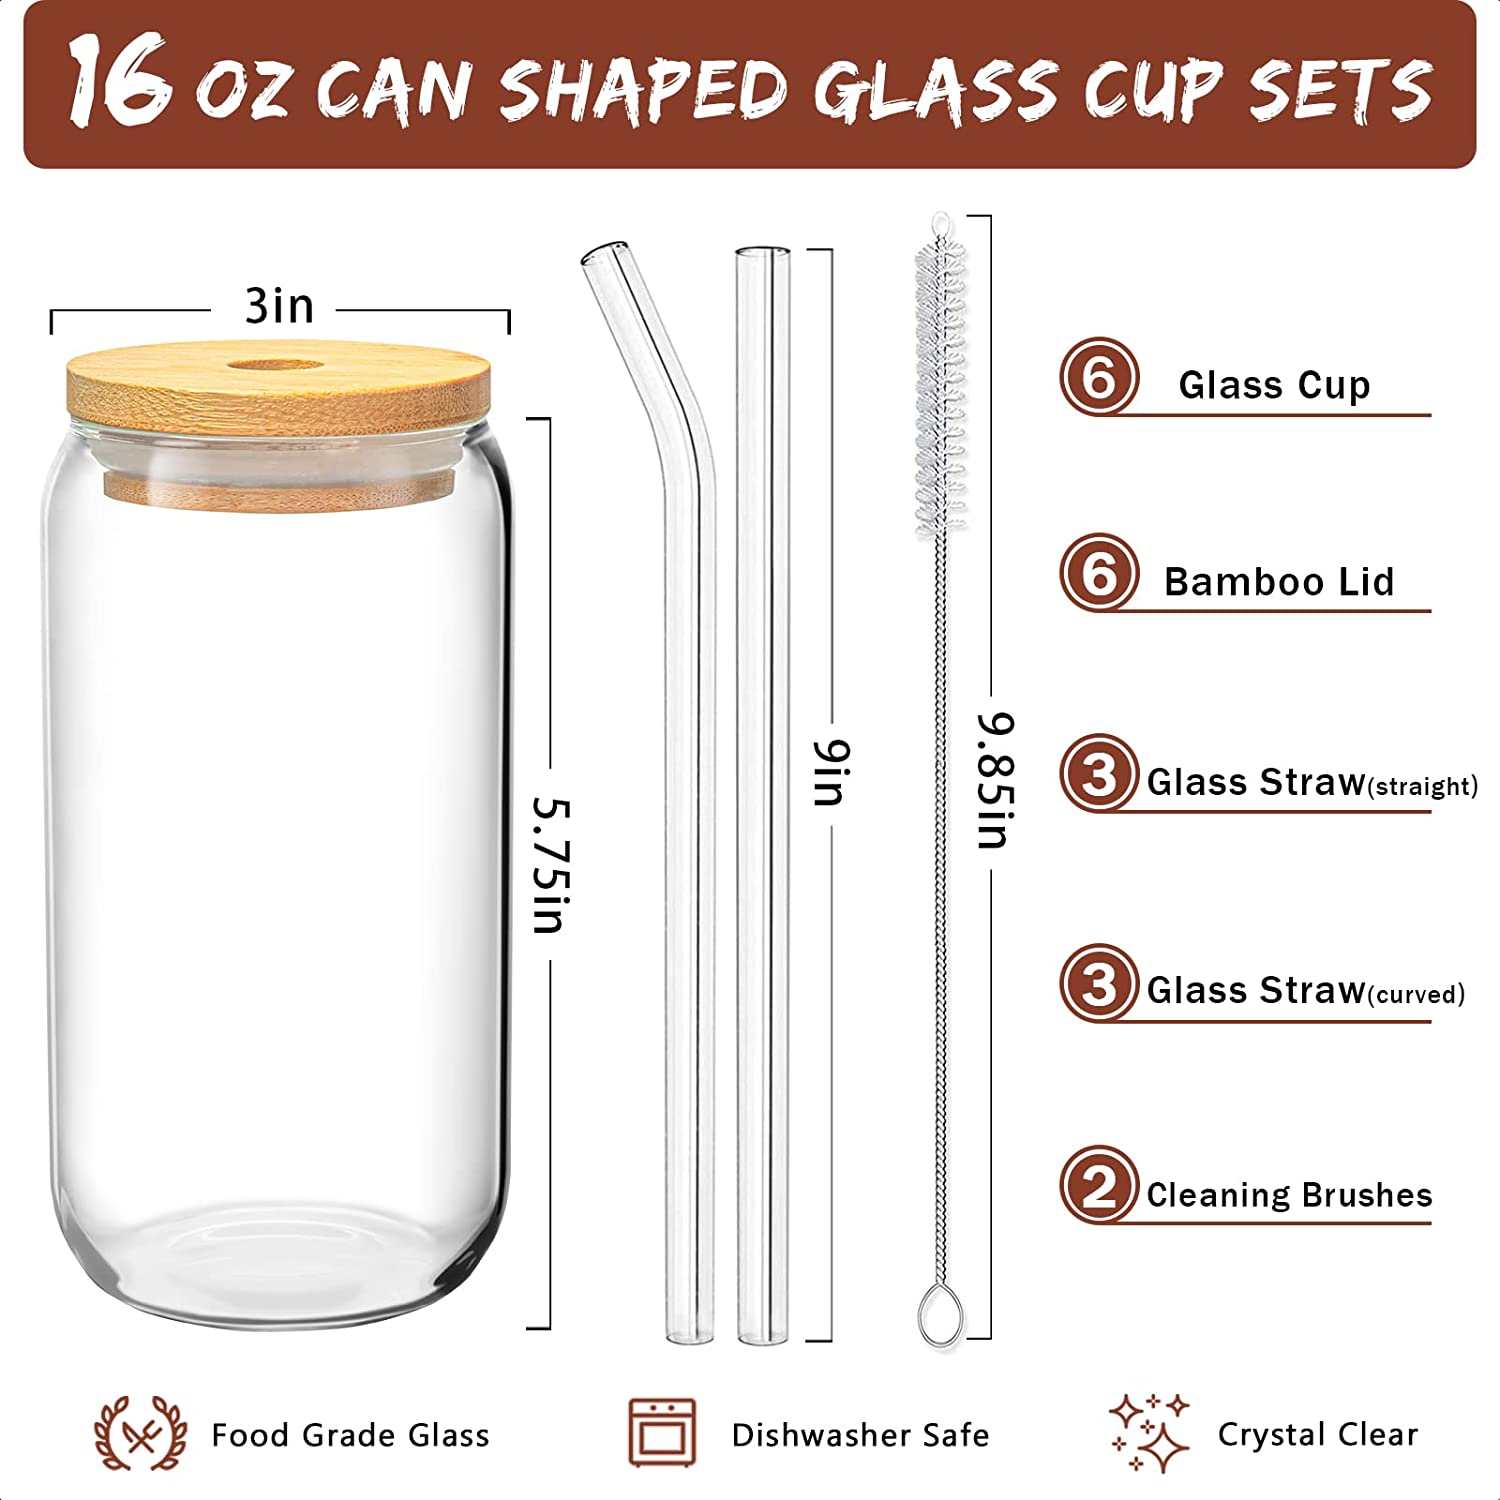 Drinking Glasses with Bamboo Lids and Glass Straw Can Shaped Glass